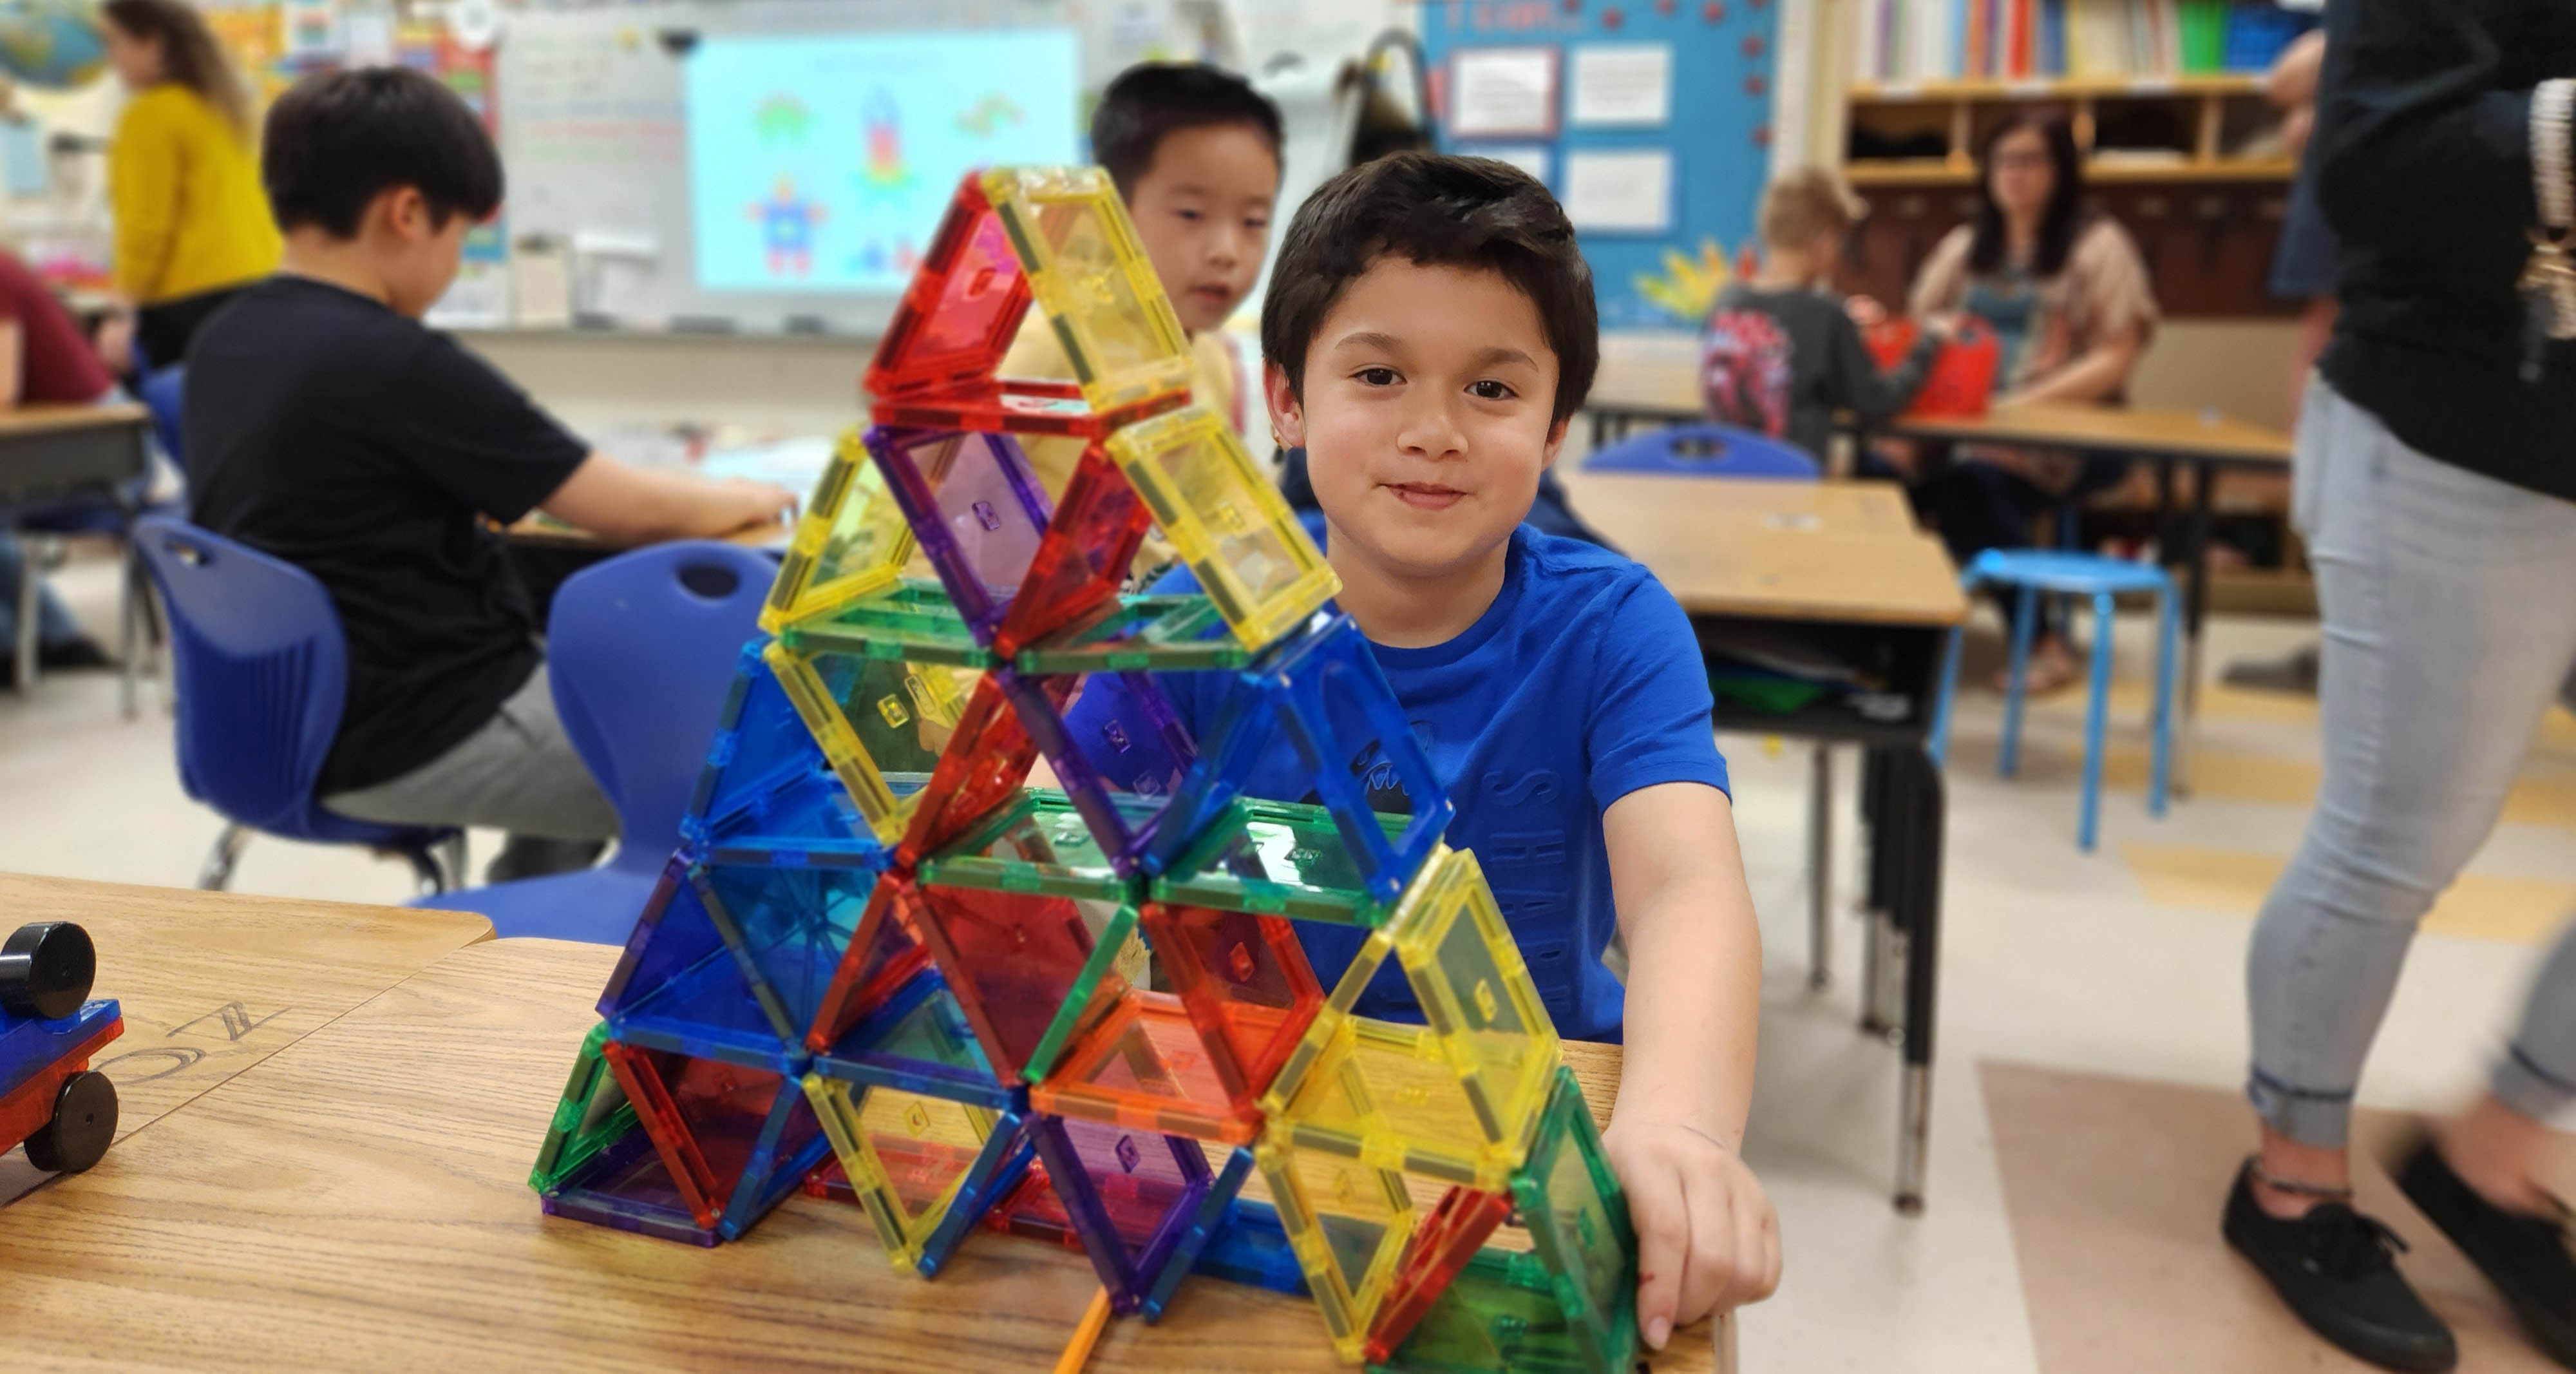 A student sitting in front of a structure made of plastic pieces